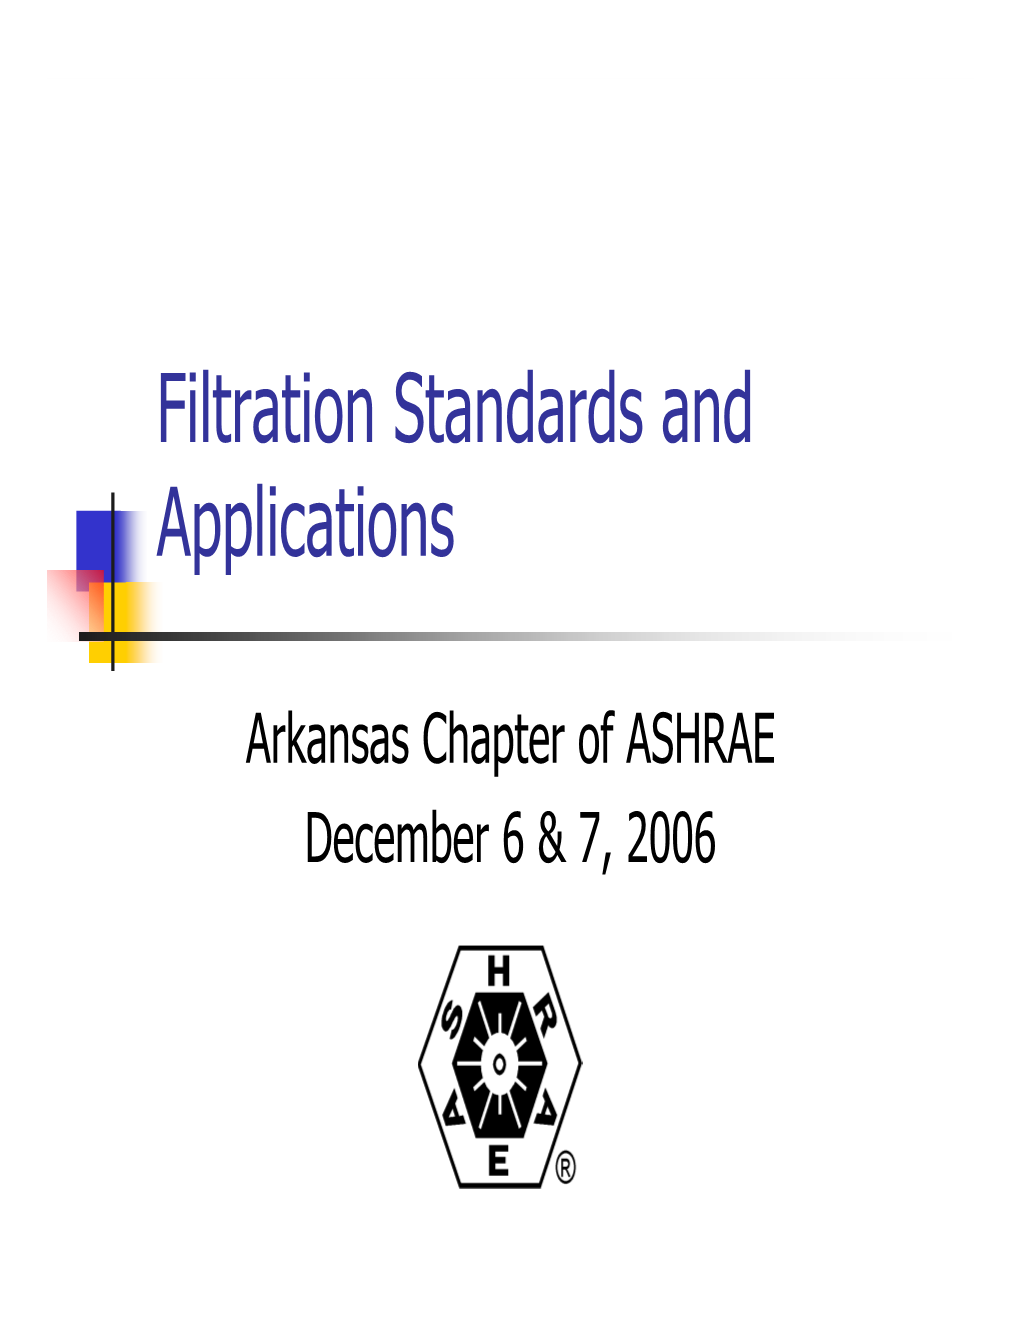 Filtration Standards and Applications by John Carter